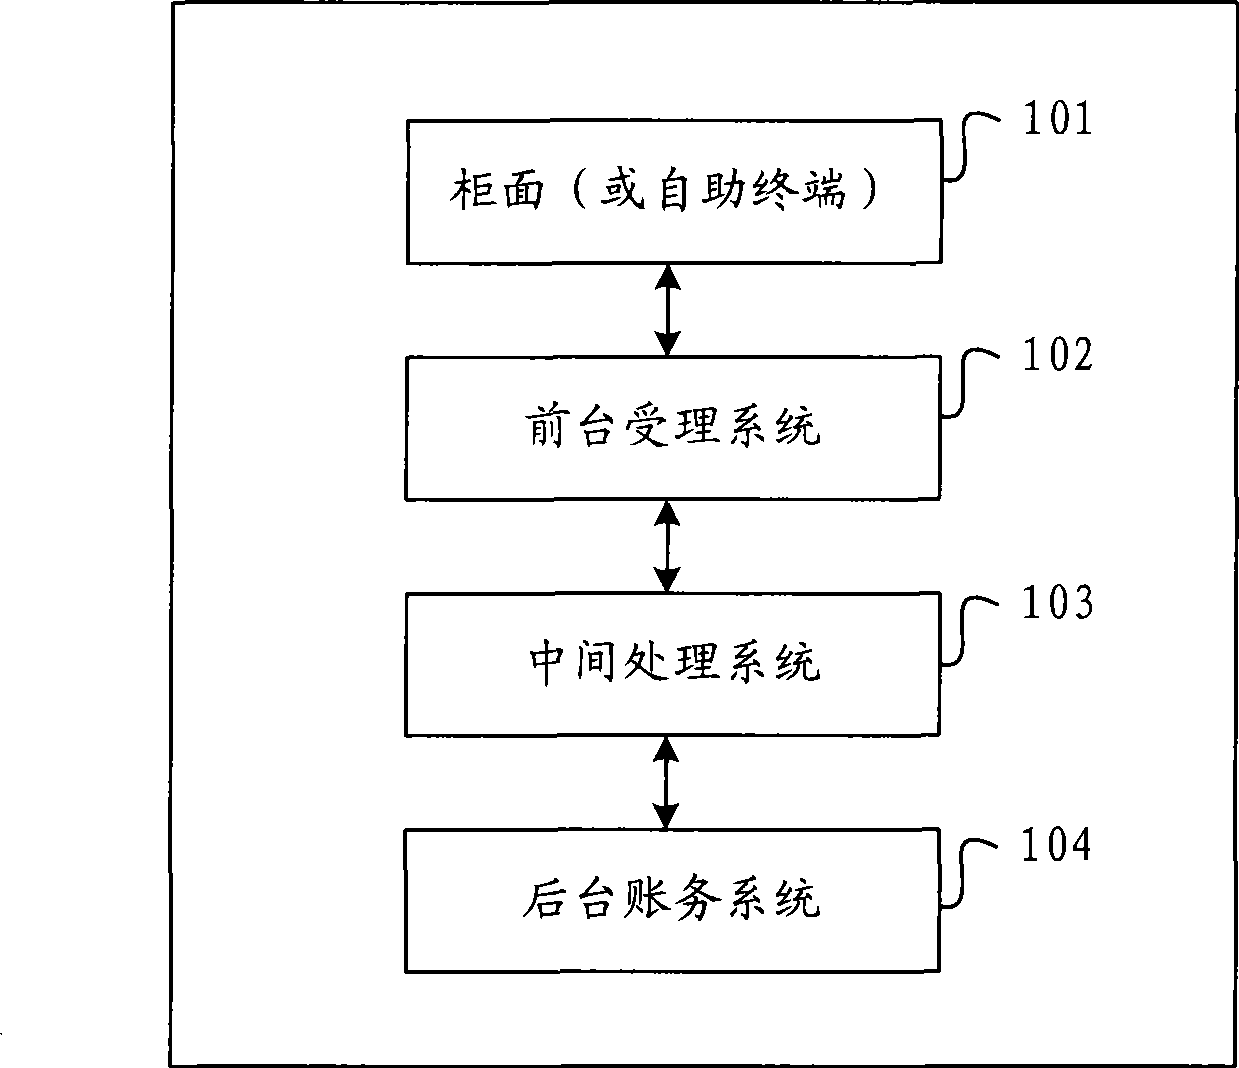 Transaction data processing method and system for realizing transferring within a day